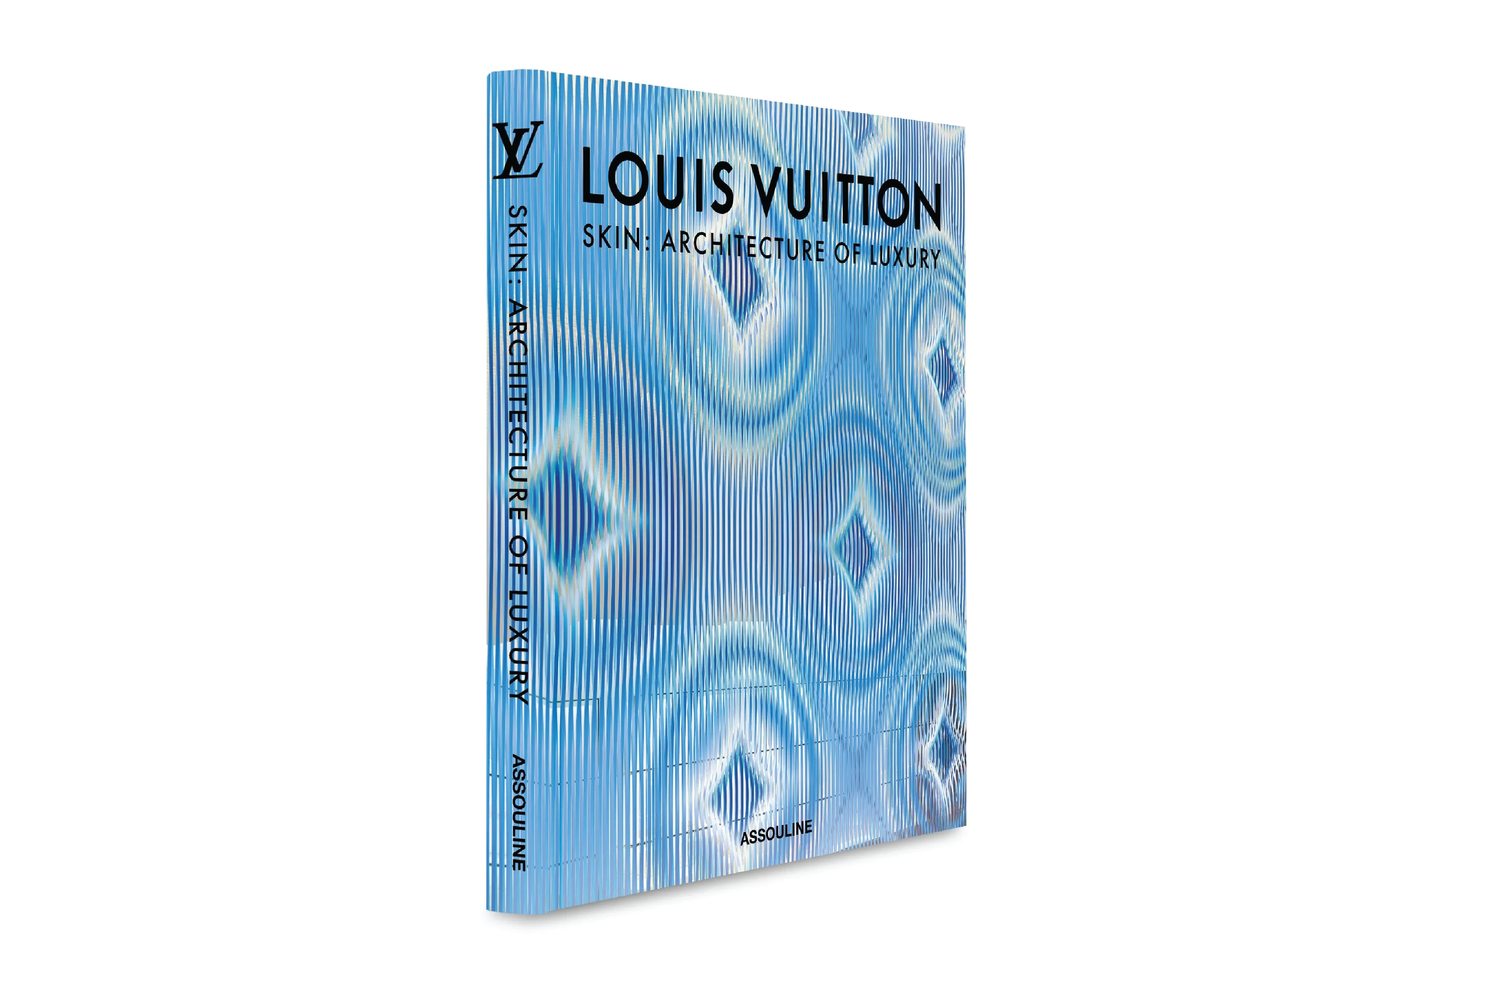 ASSOULINE Louis Vuitton Skin: Architecture of Luxury (New York City  Edition) Coffee Table Book – Cayman's